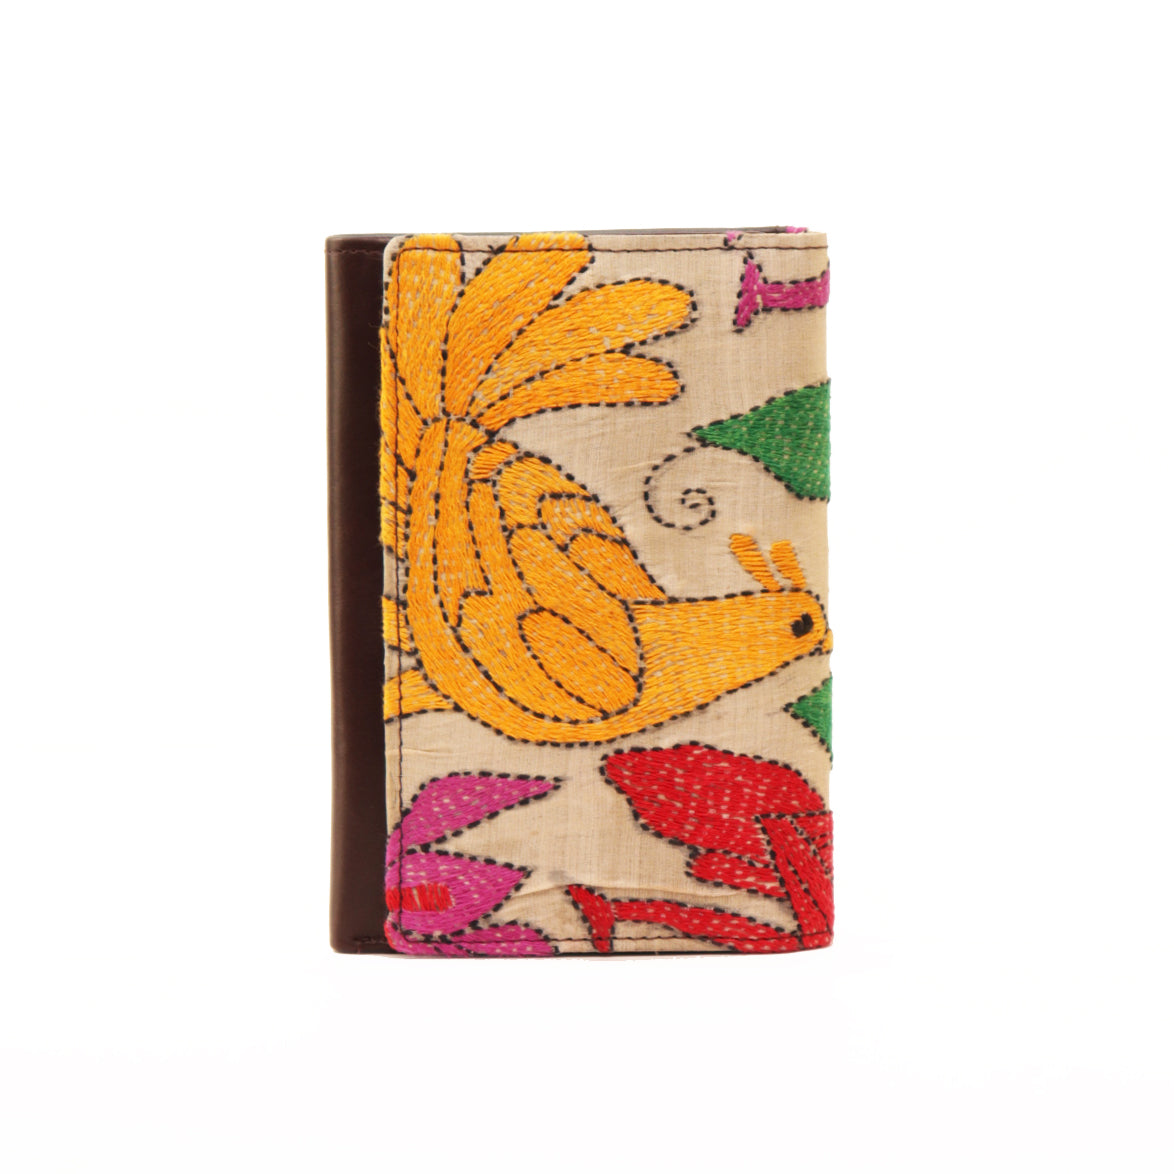 Maheejaa Leather-Kantha Handcrafted Women's Tri-fold Wallet - Chocolate Brown